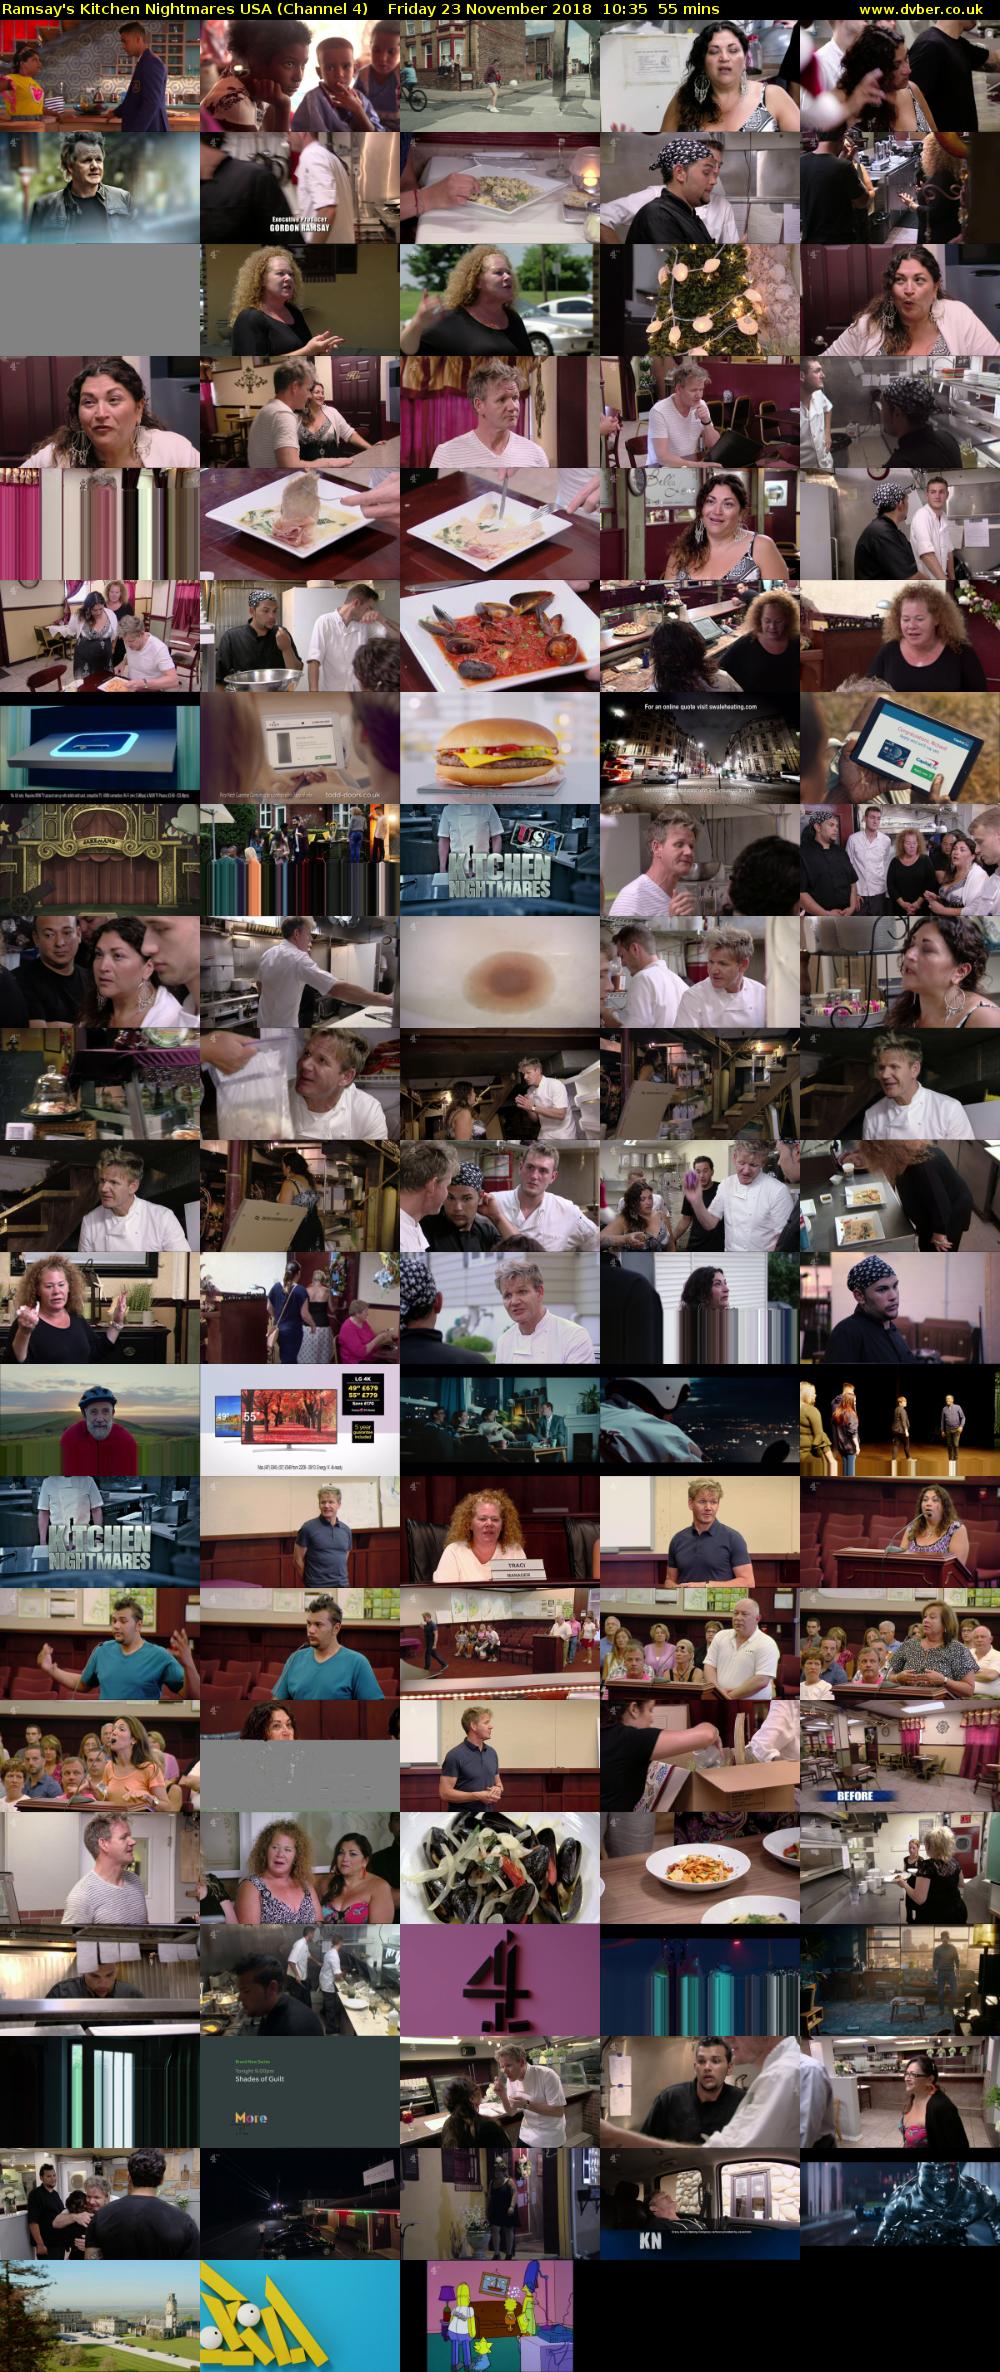 Ramsay's Kitchen Nightmares USA (Channel 4) Friday 23 November 2018 10:35 - 11:30